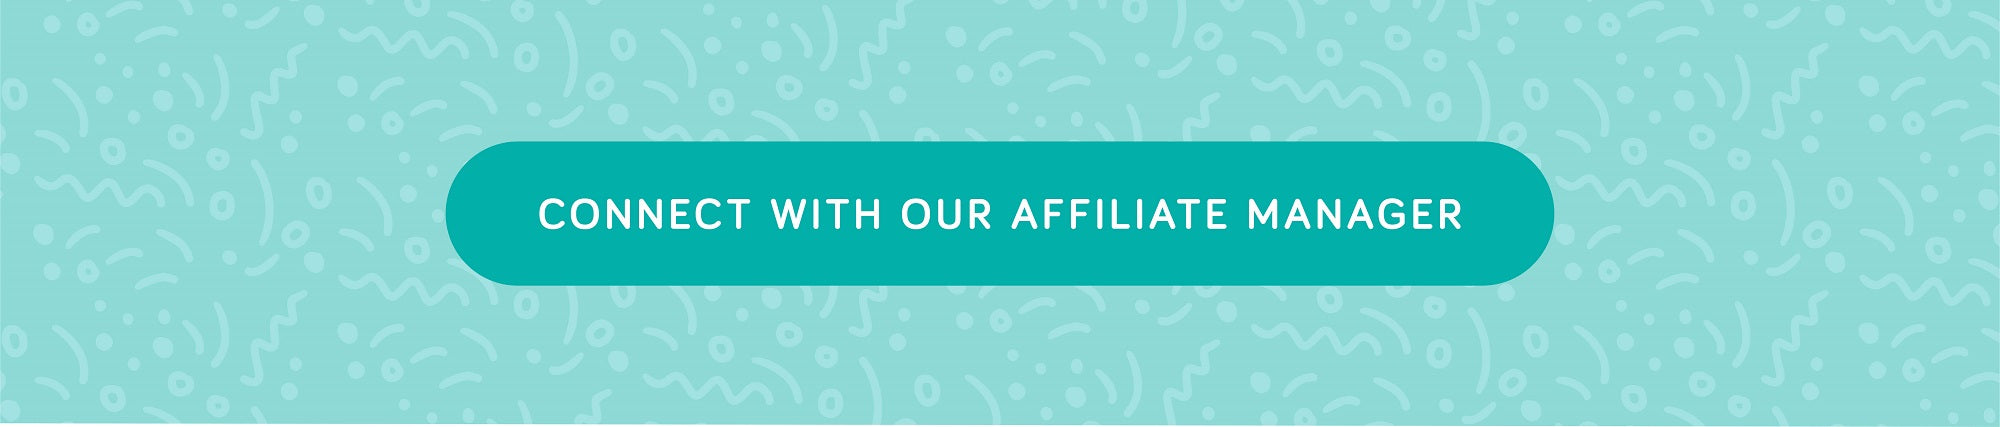 Connect with our affiliate manager!